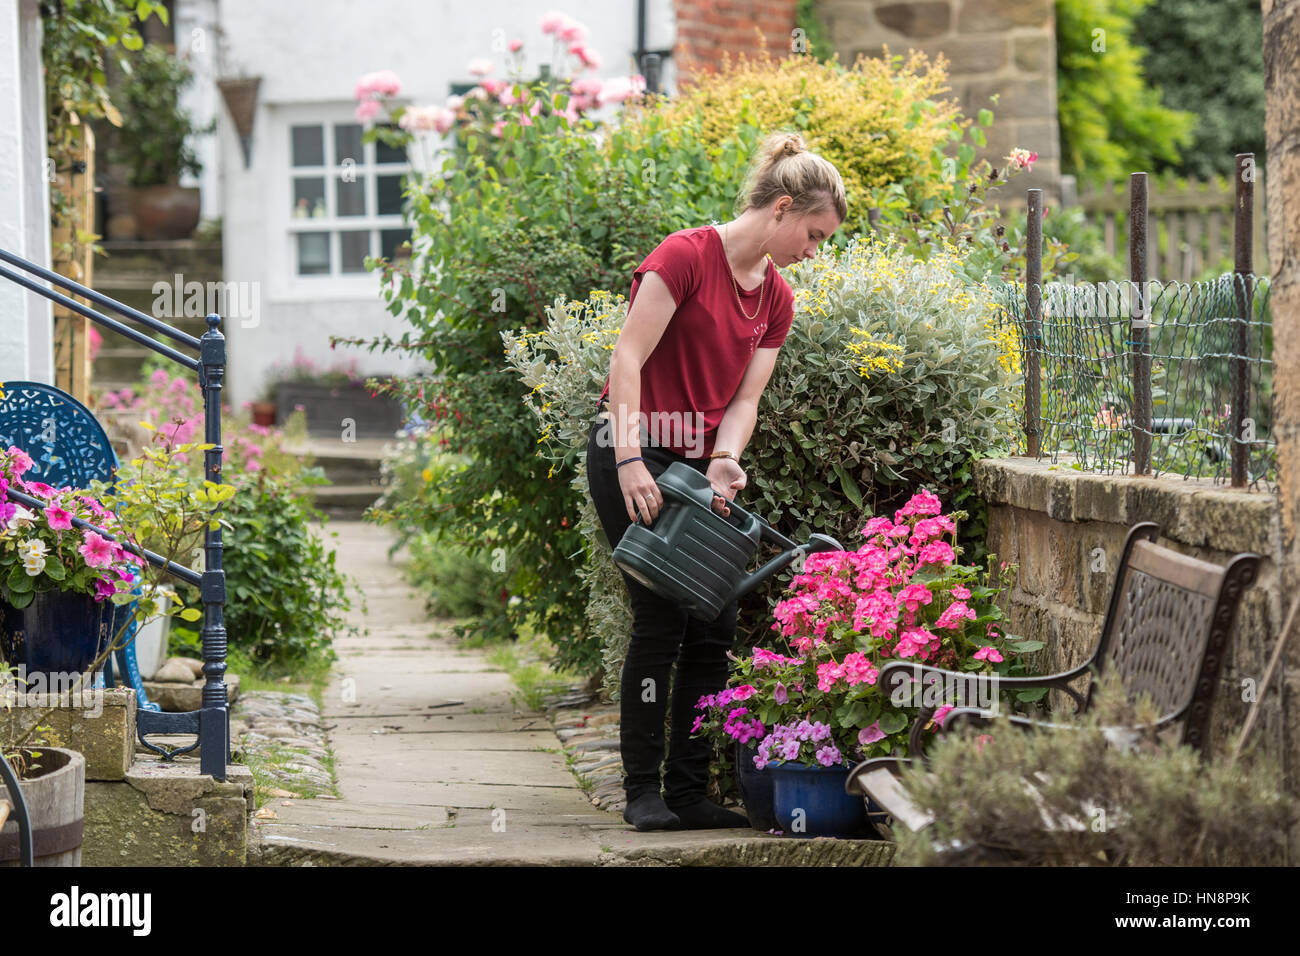 UK, England, Yorkshire - A young woman watering her flowers in a small fishing village called Robin Hood's Bay, located on the coast of North Yorkshir Stock Photo